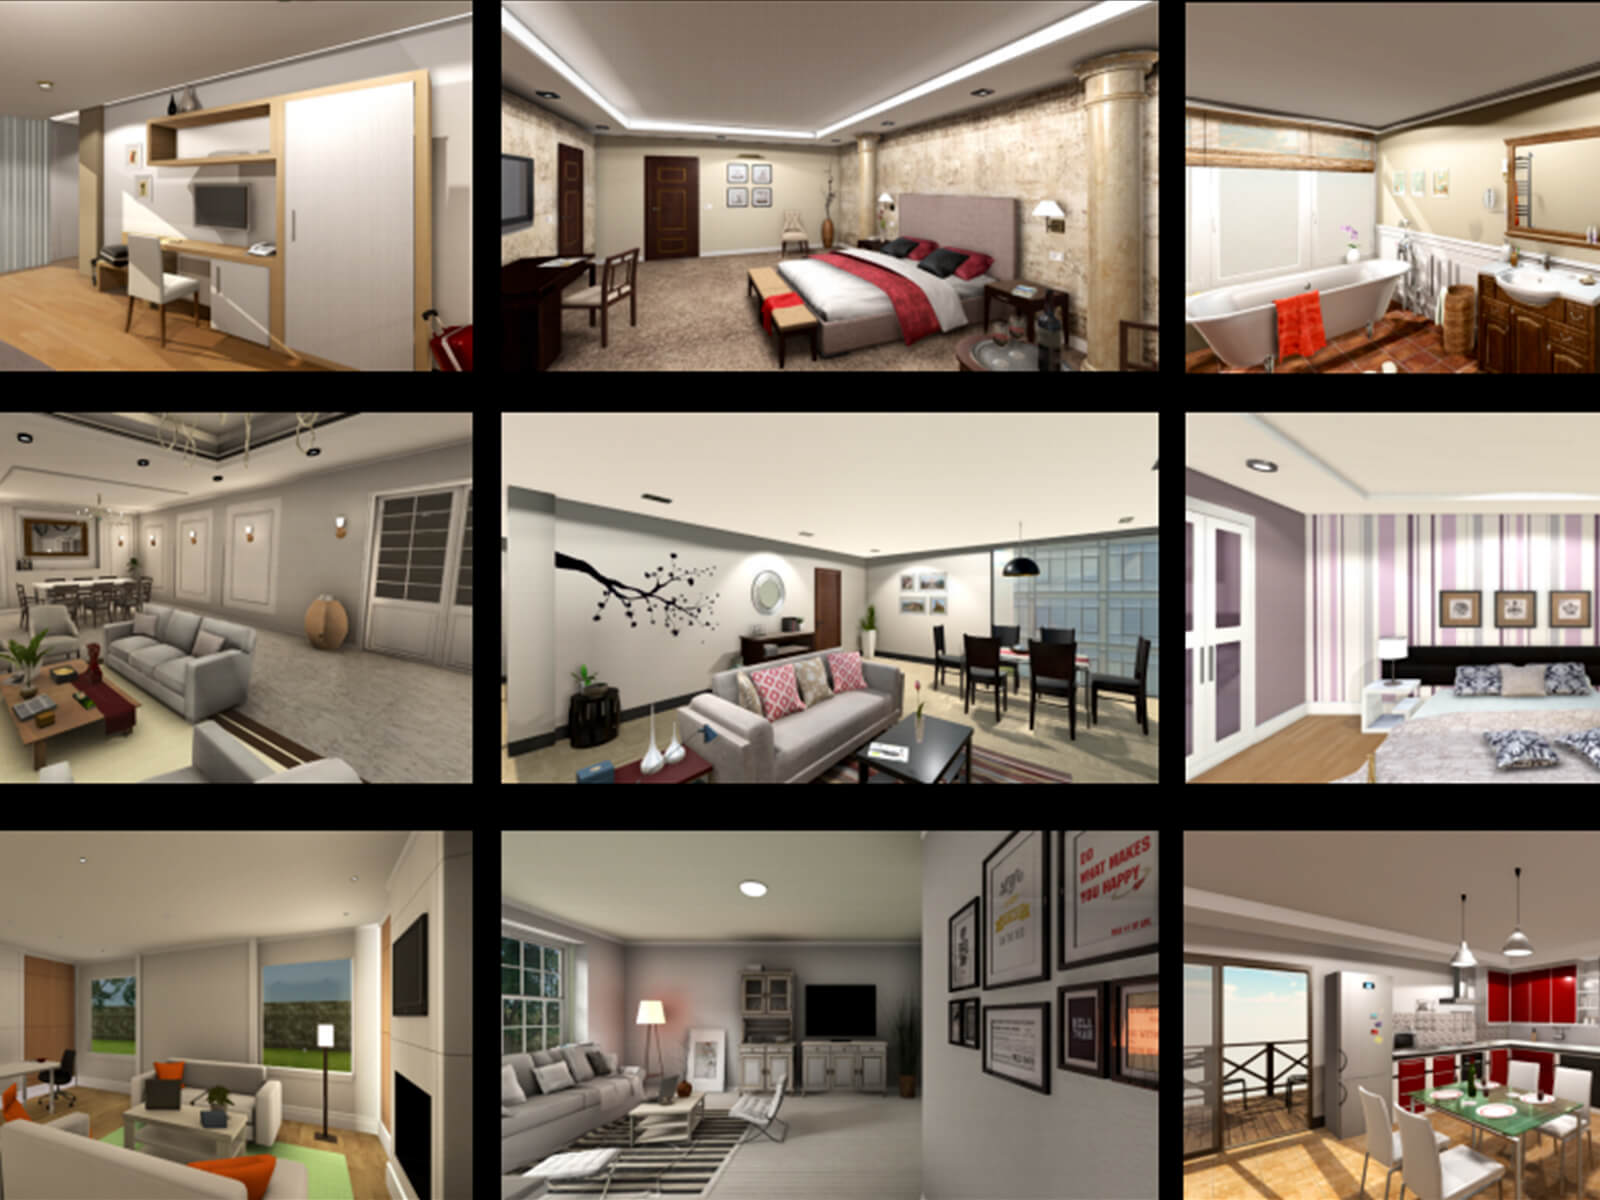 A collage of room environments from the Allen Institute for AI’s “AI2-THOR” project.